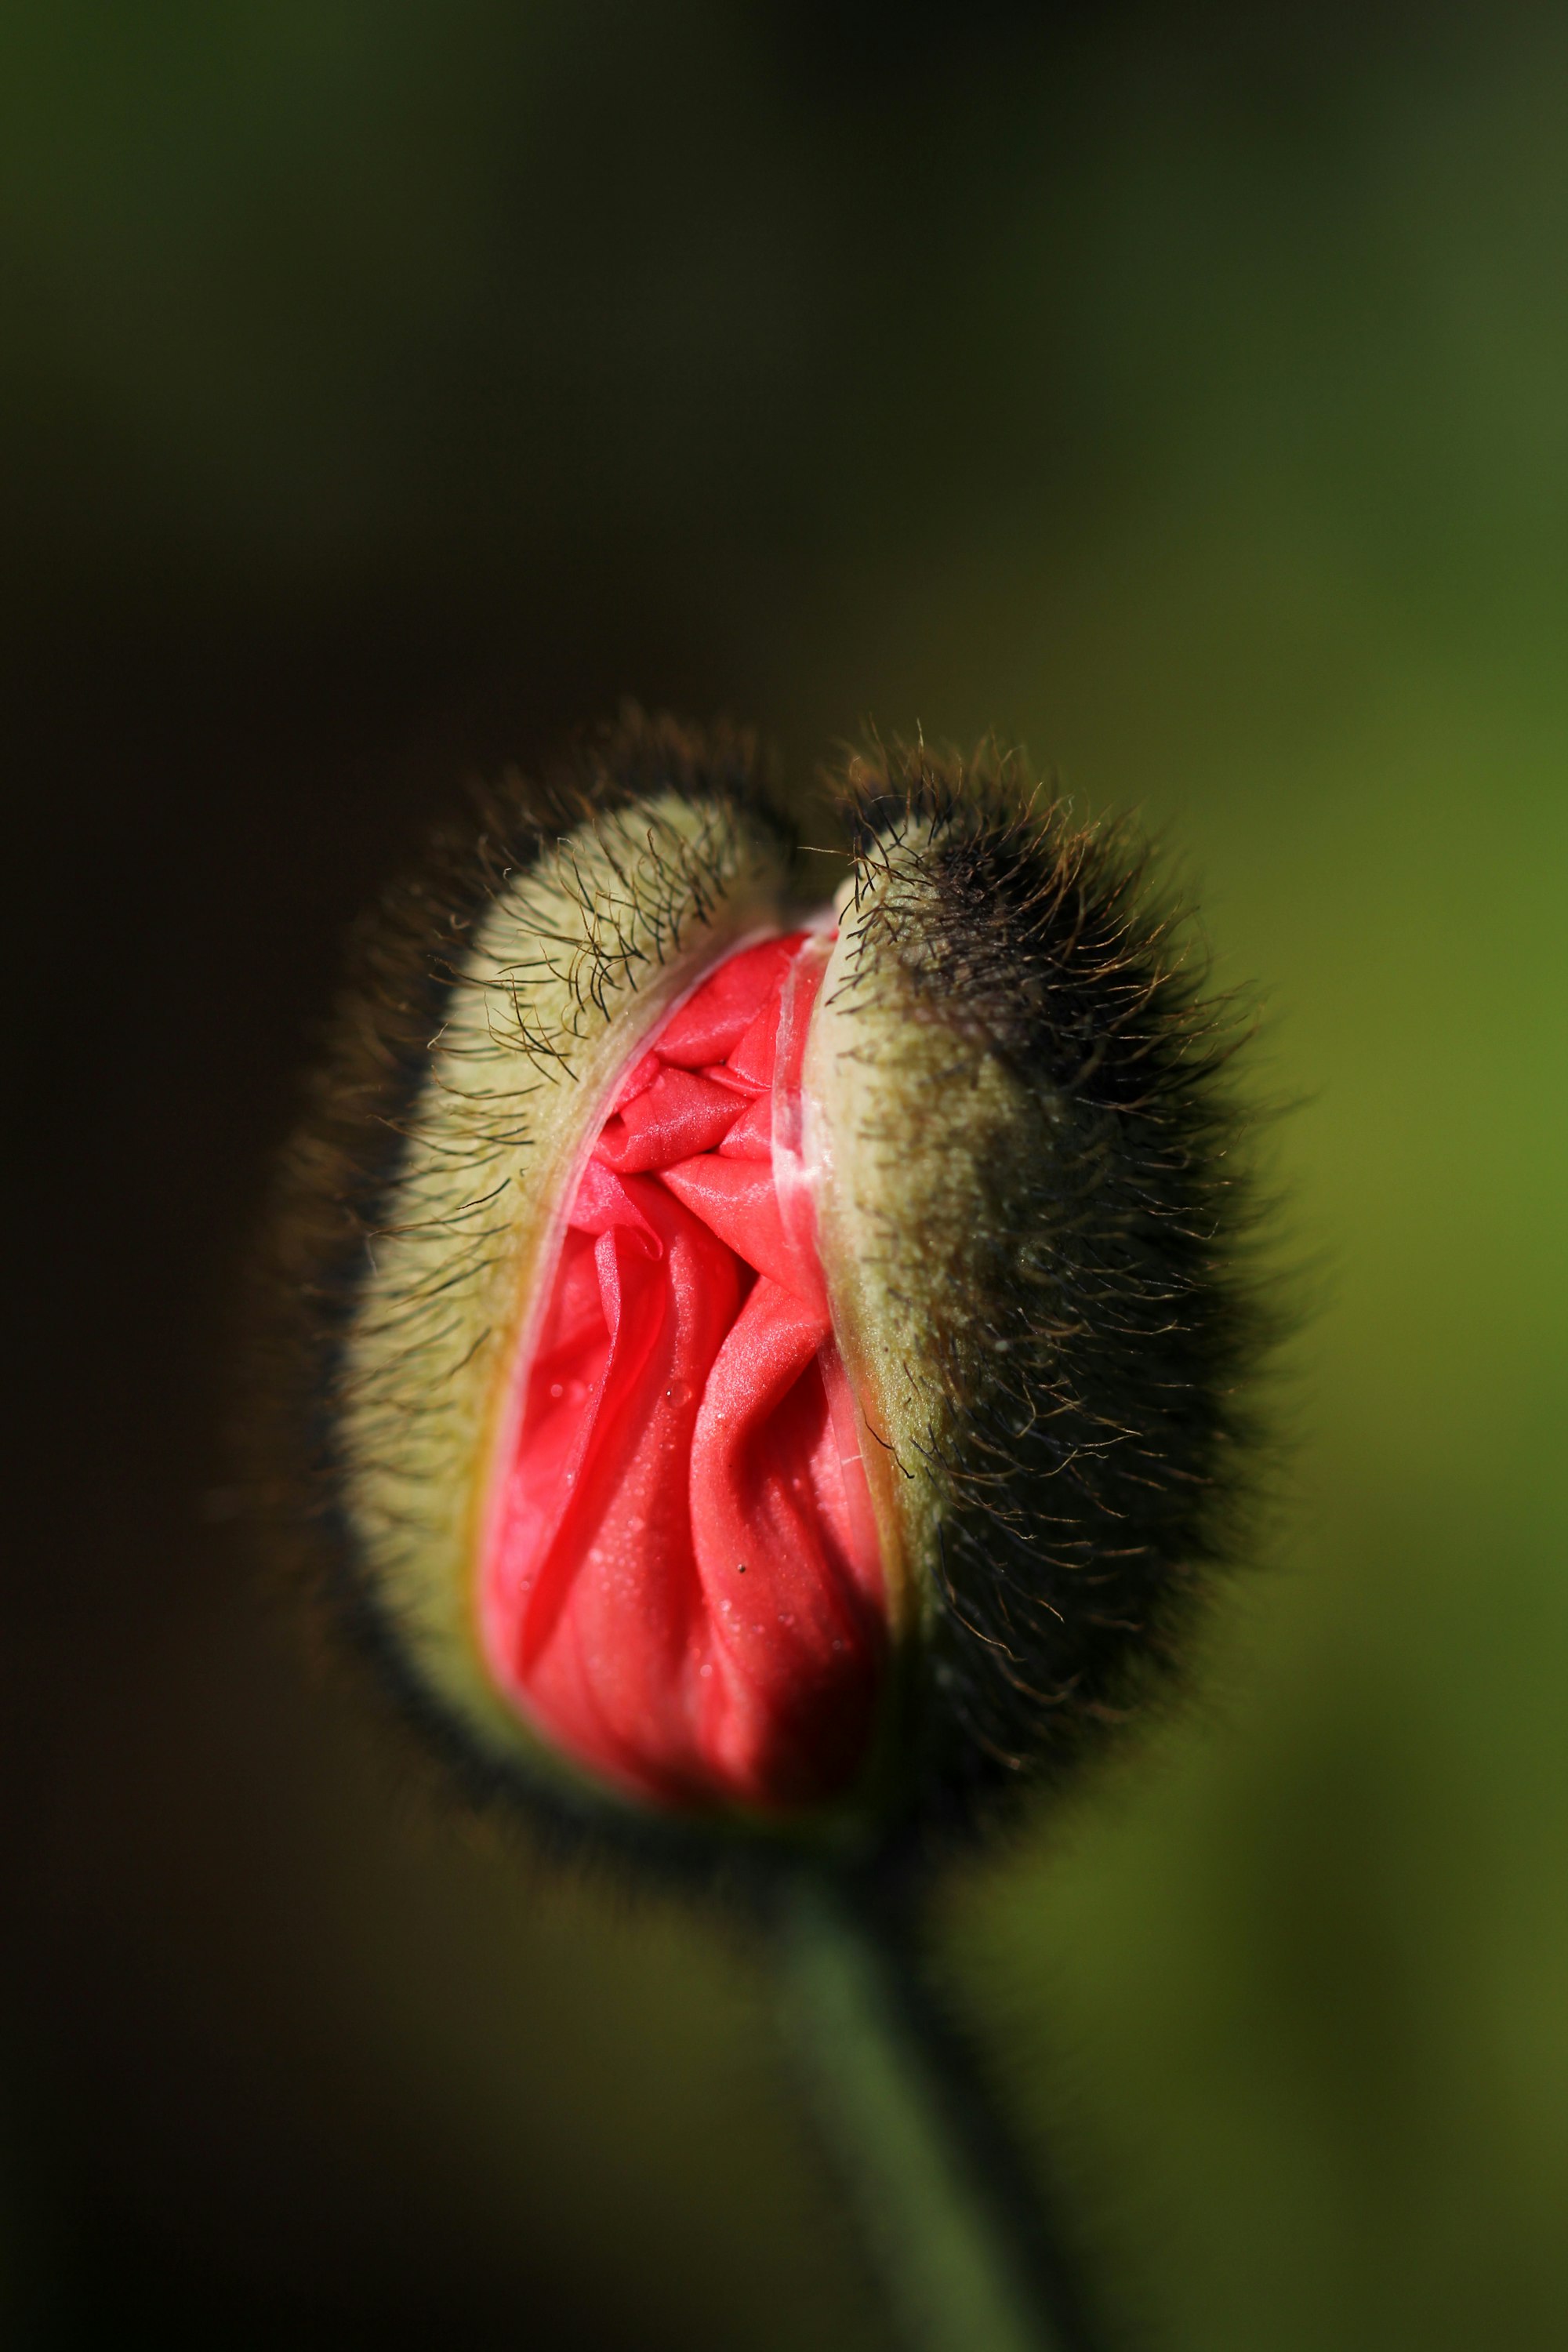 The poppy is provocative … beautiful and delicate in late winter.